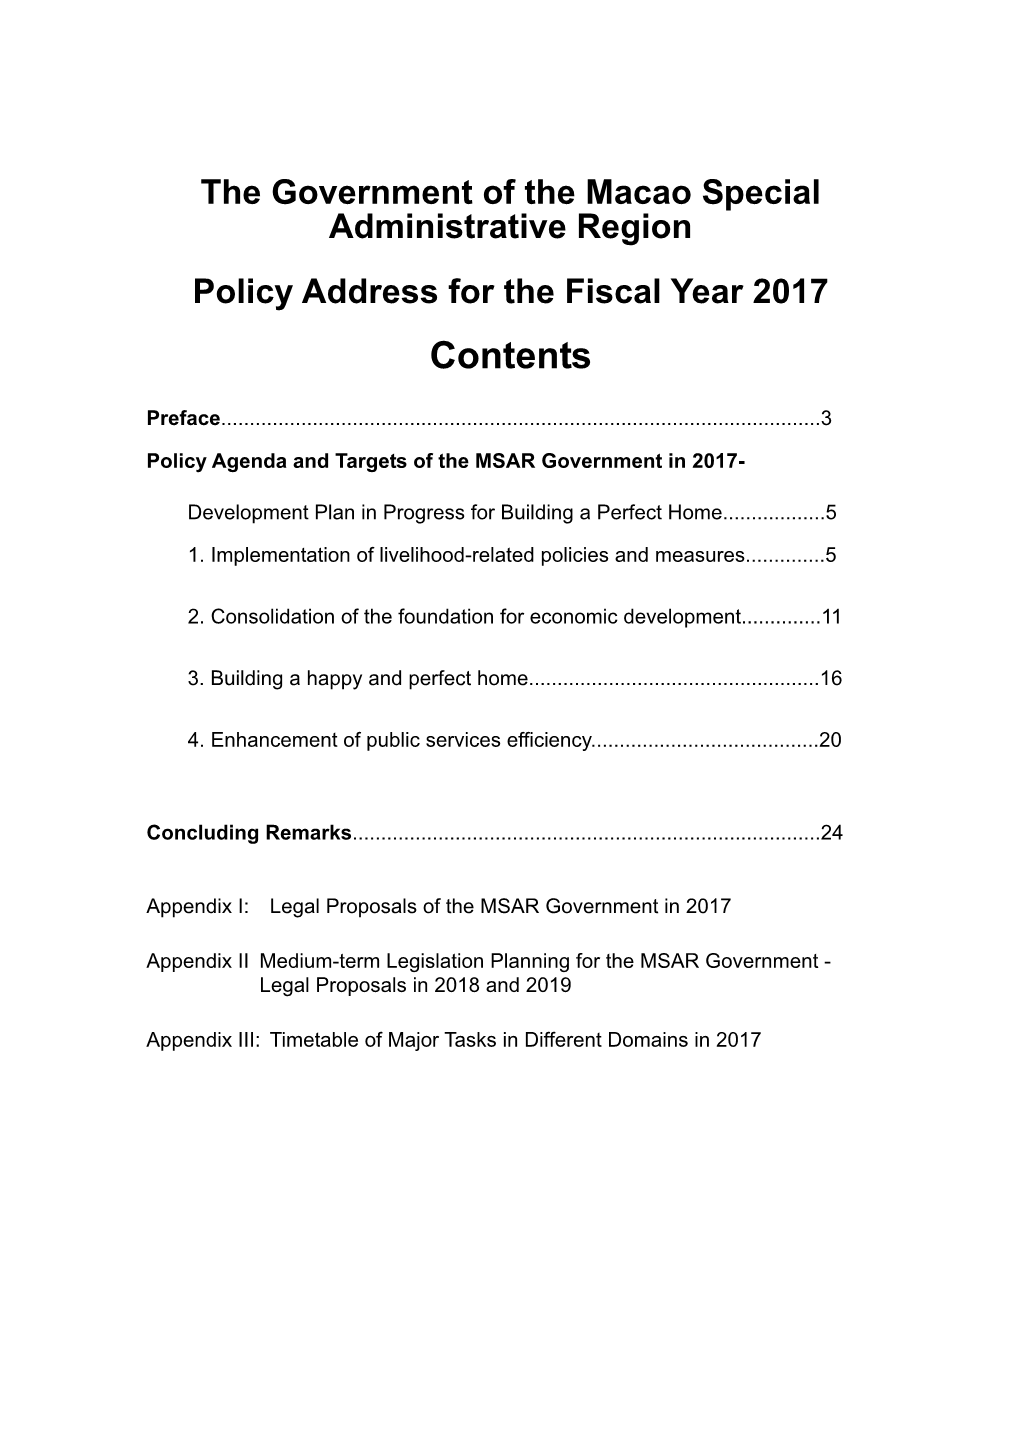 Policy Address for the Fiscal Year 2017 Contents